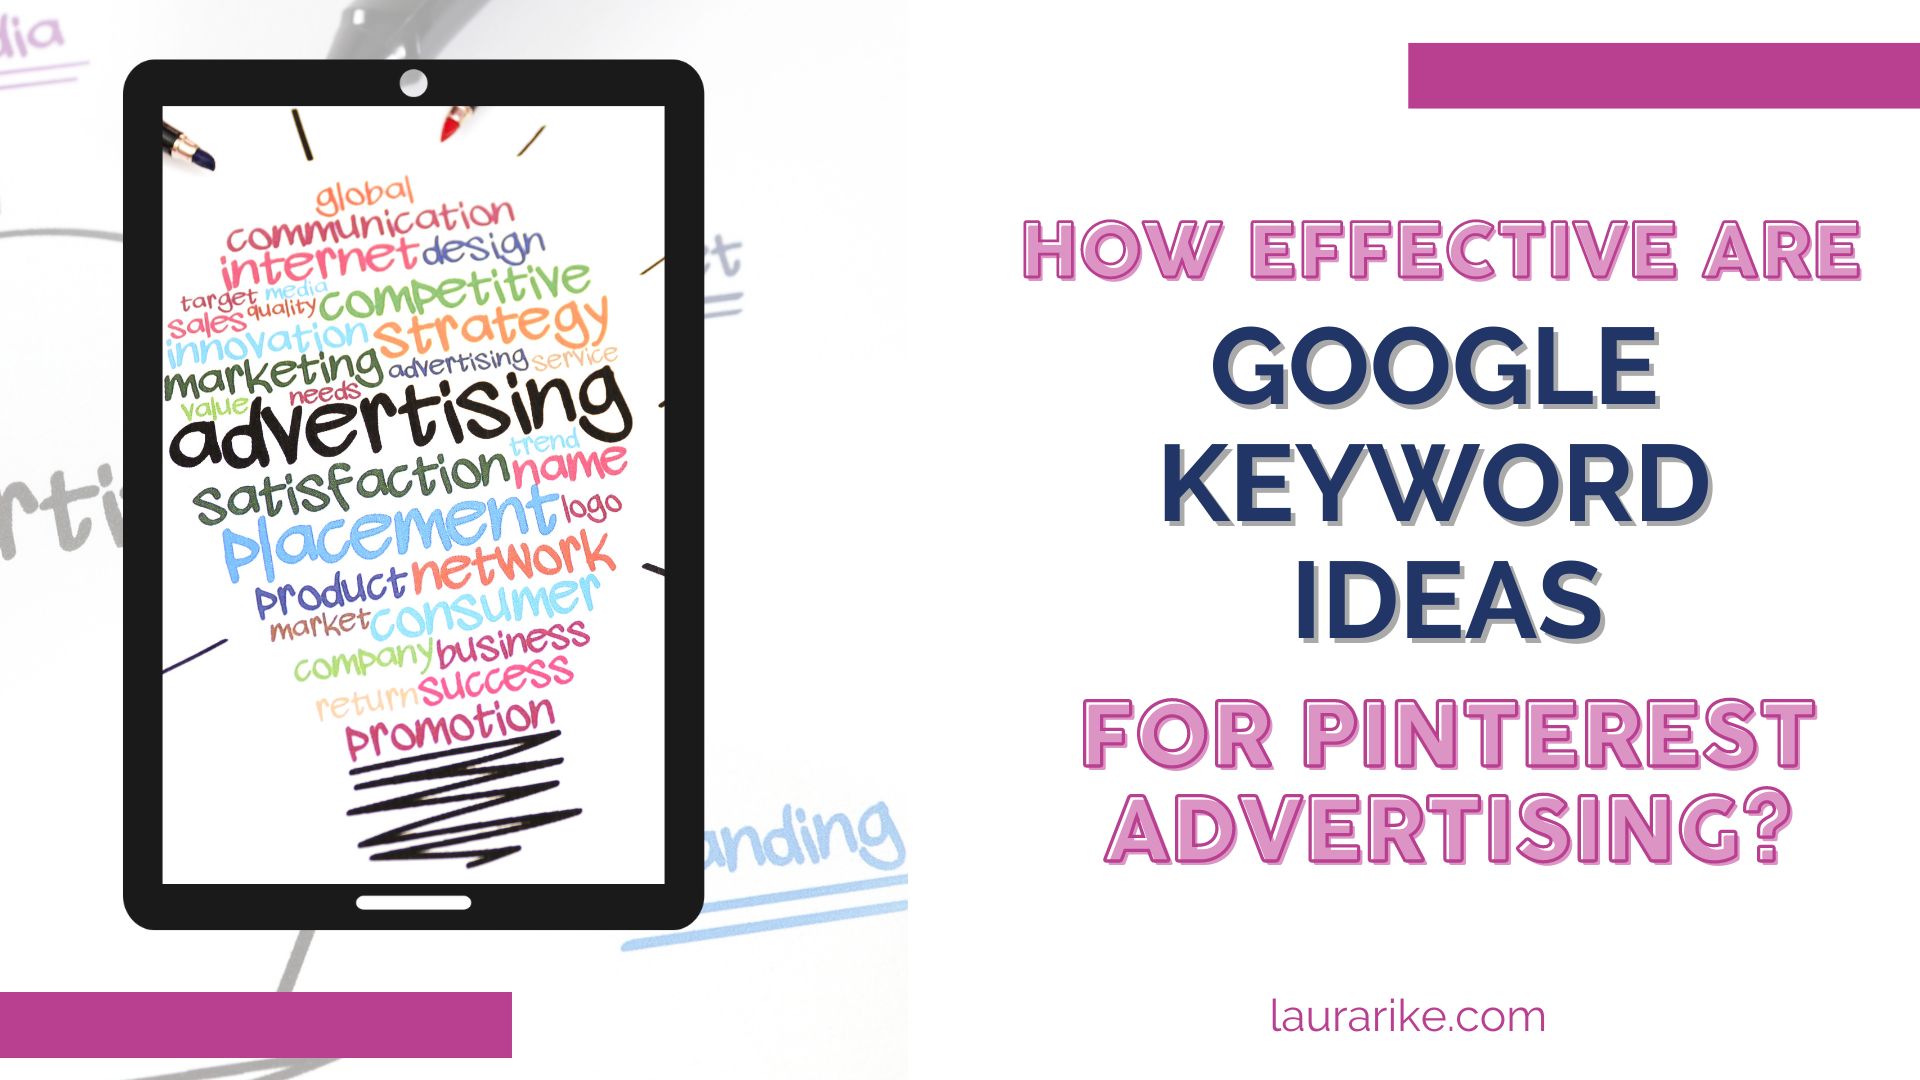 How Effective Are Google Keyword Ideas for Pinterest Ads?